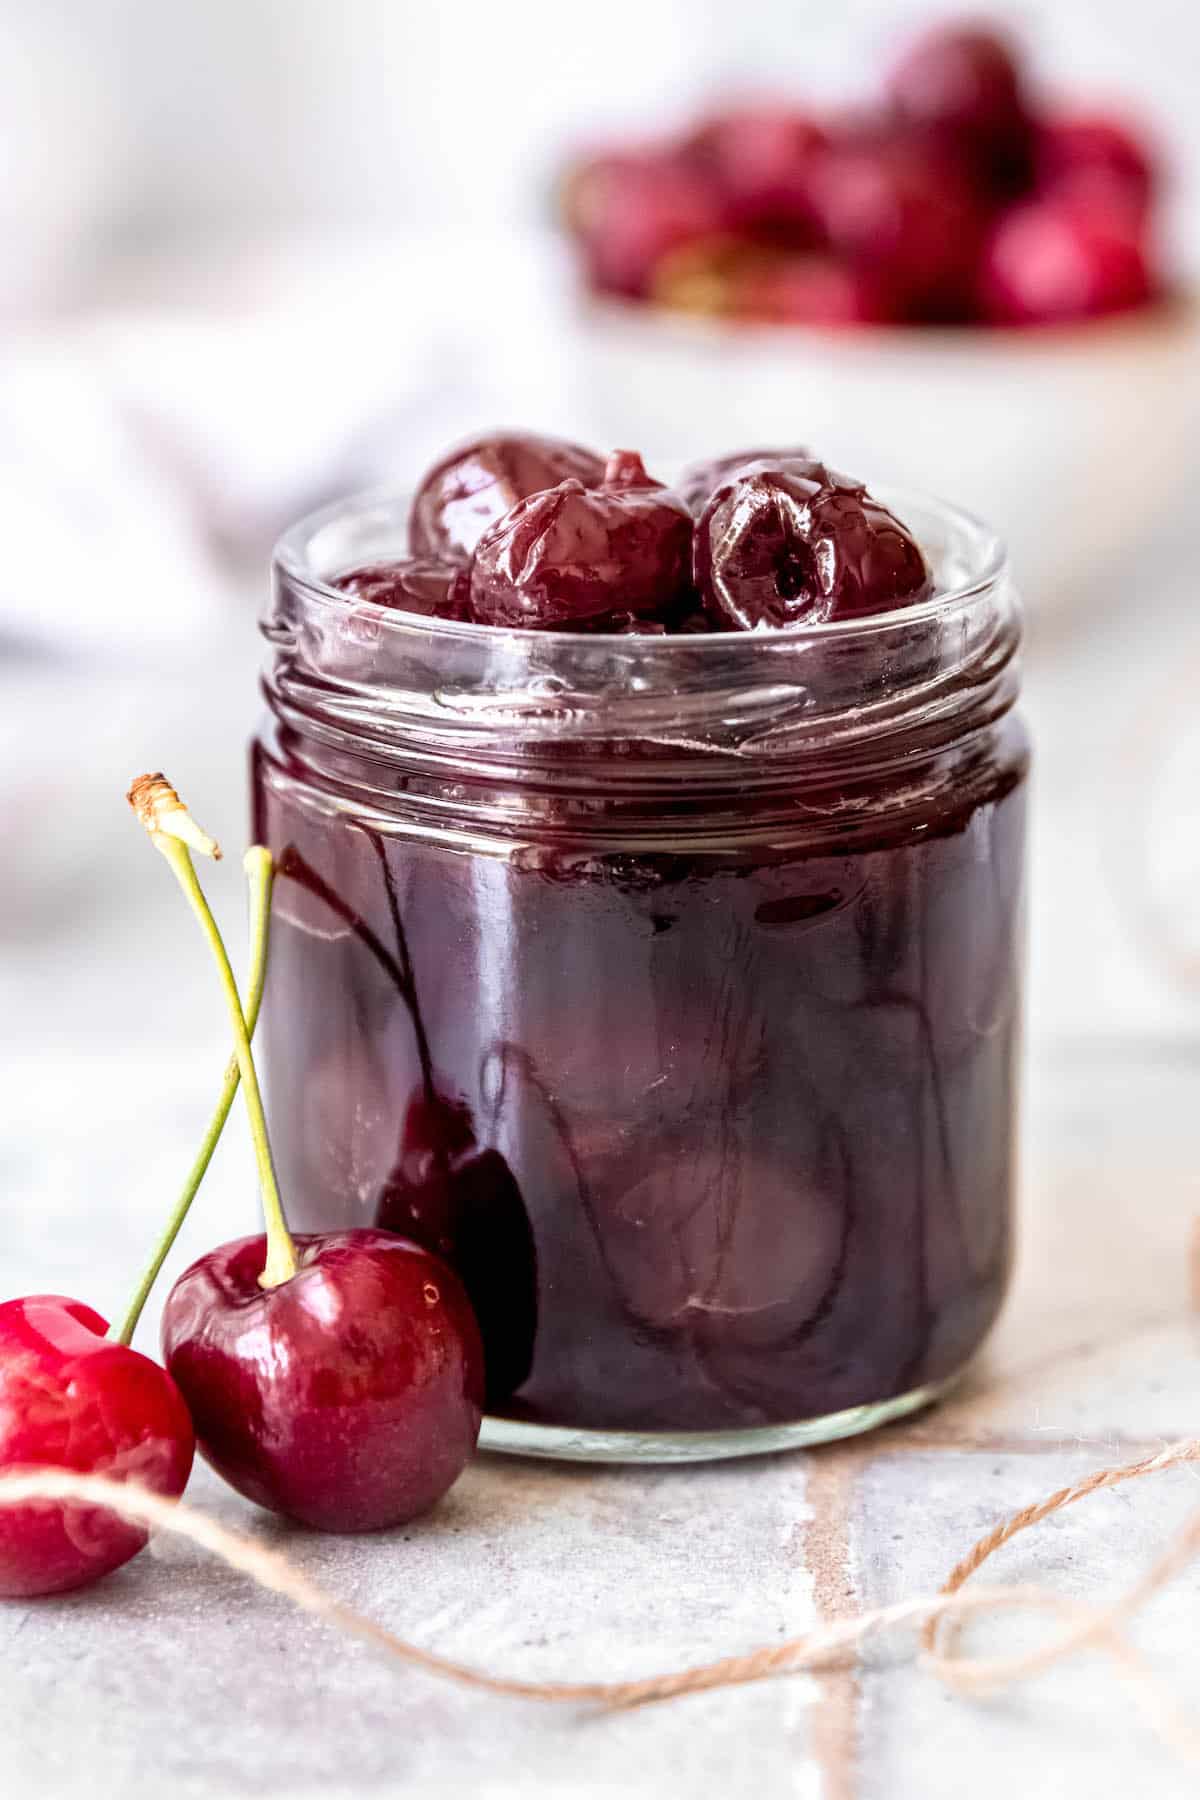 clear glass jar of homemade amaretto marinated cherries on a tiled surface with some twine and fresh cherries scattered around.